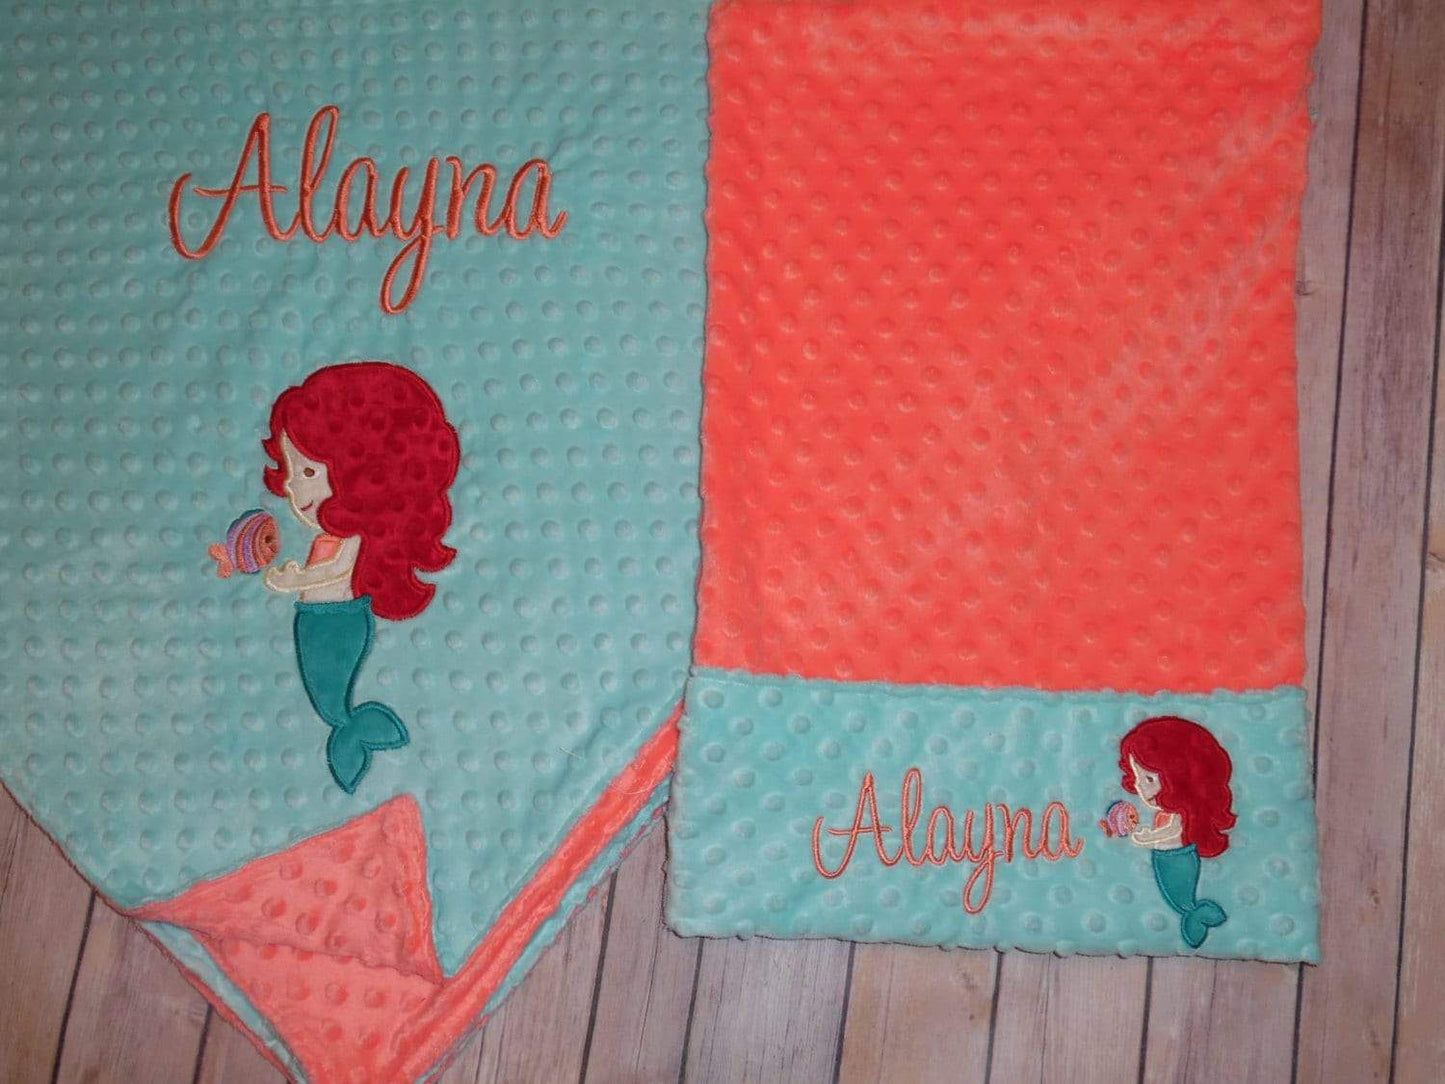 Mermaid Nap Set - Personalized Minky Blanket and Pillowcase with embroidered Mermaid - Travel or Standard Size